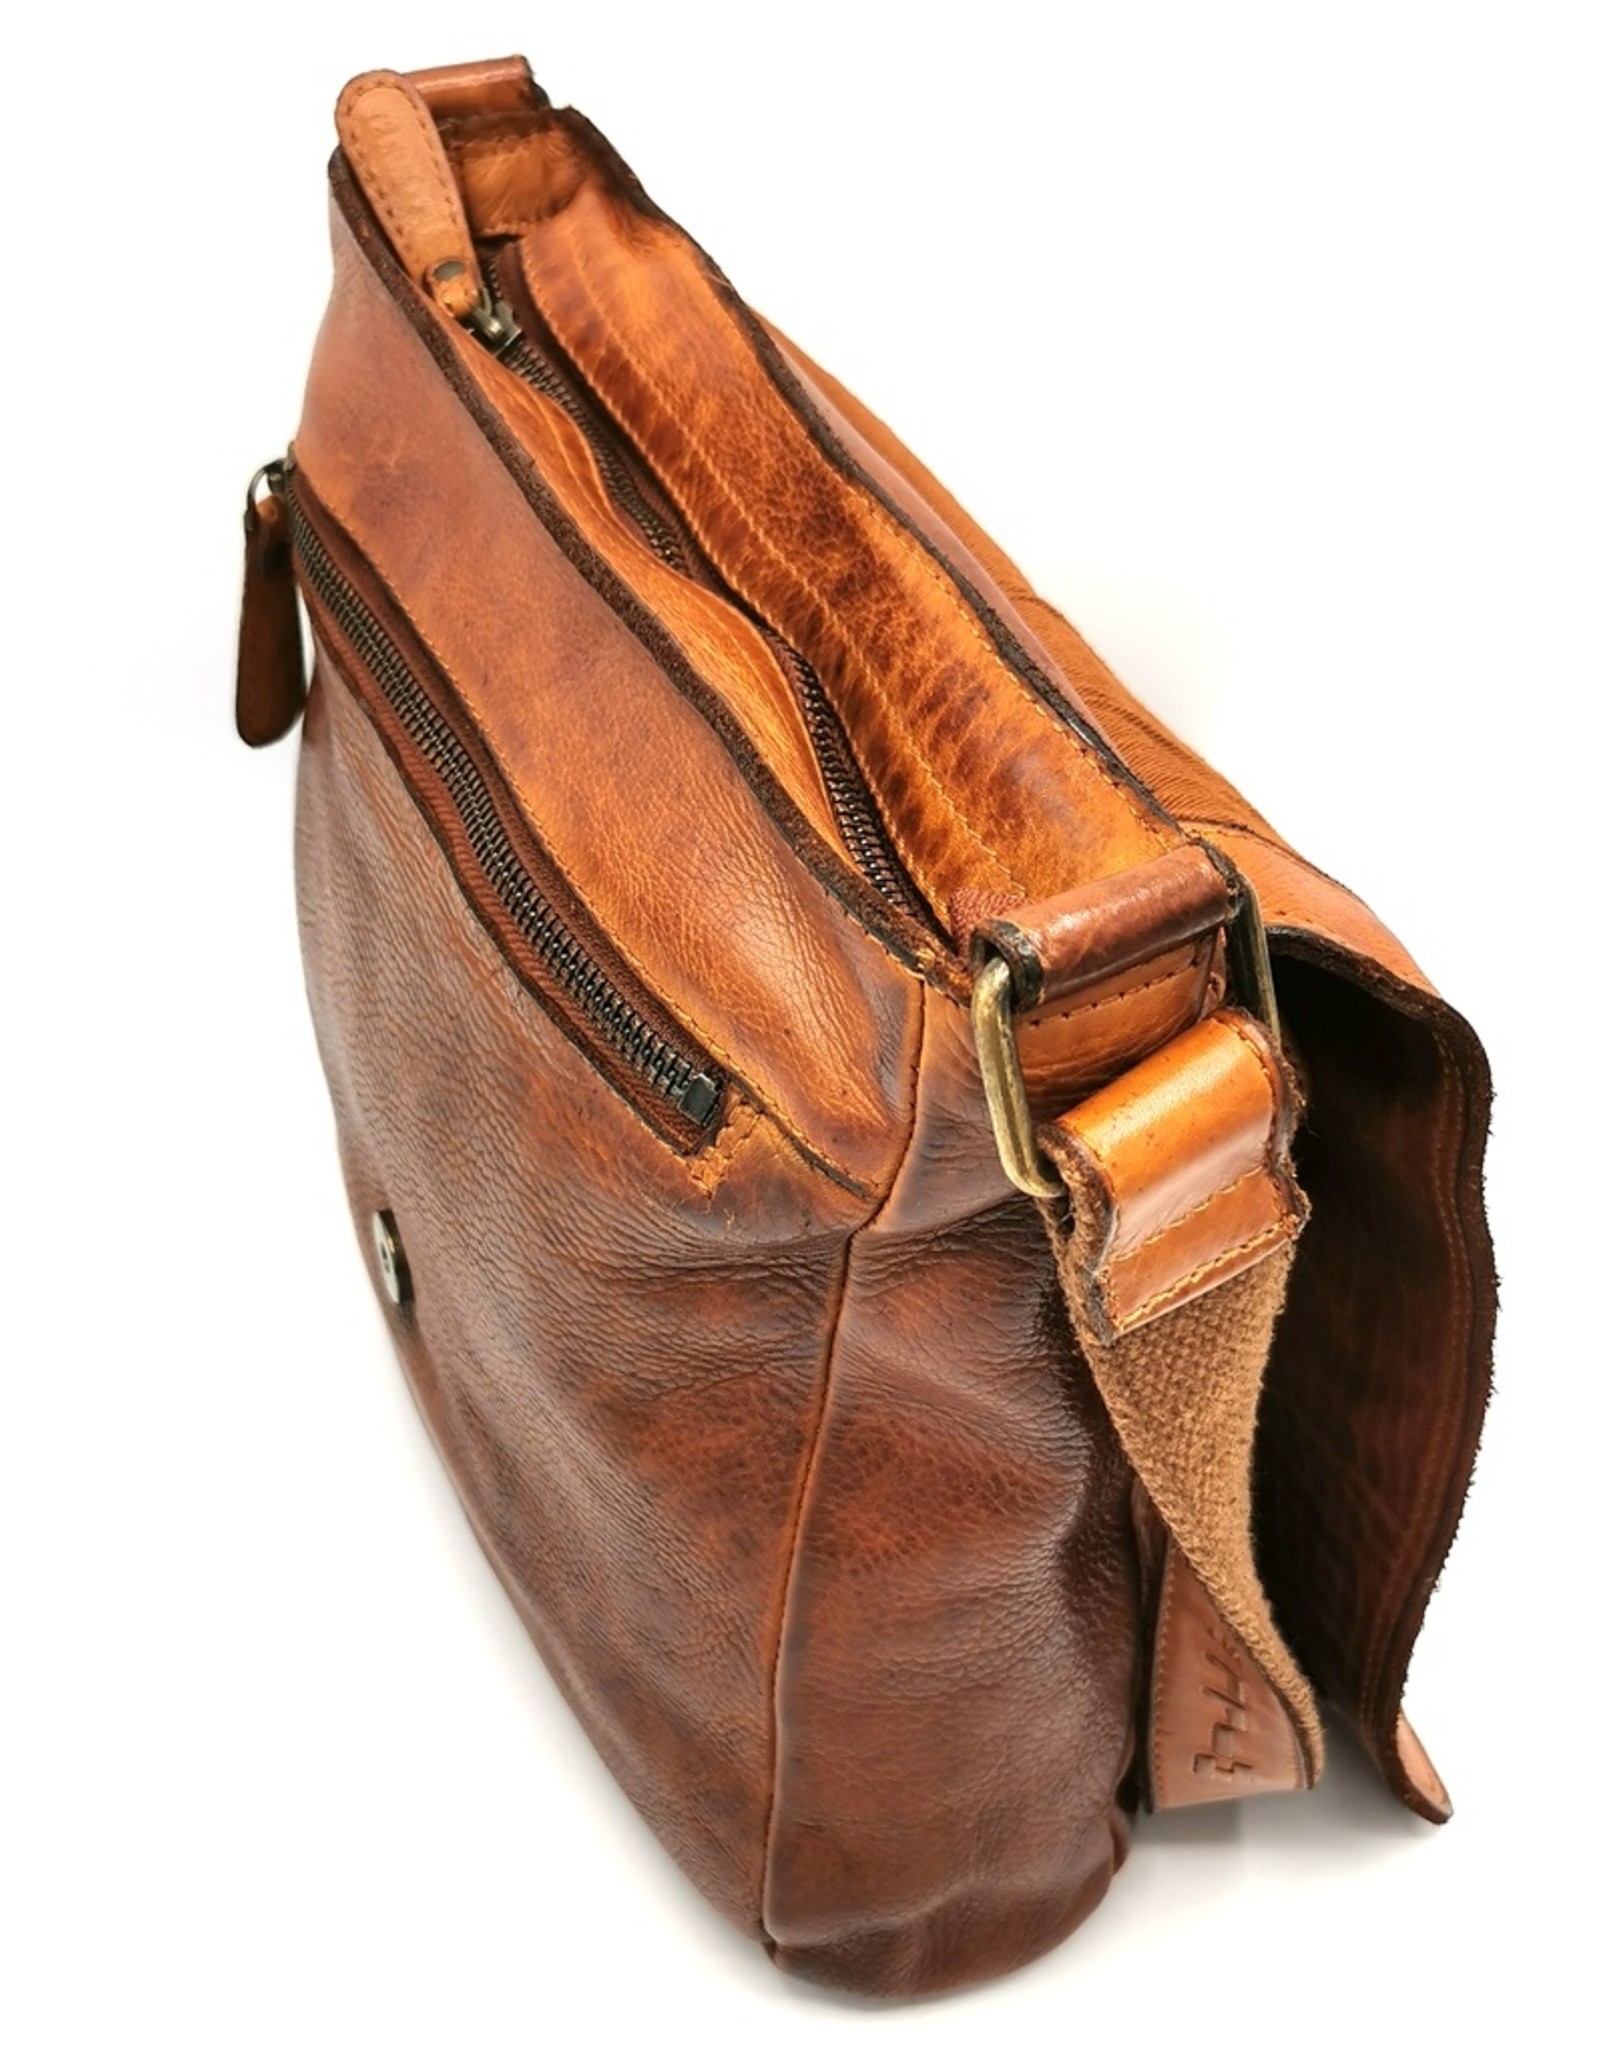 HillBurry Leather bags - HillBurry Crossbody Washed Leather tan